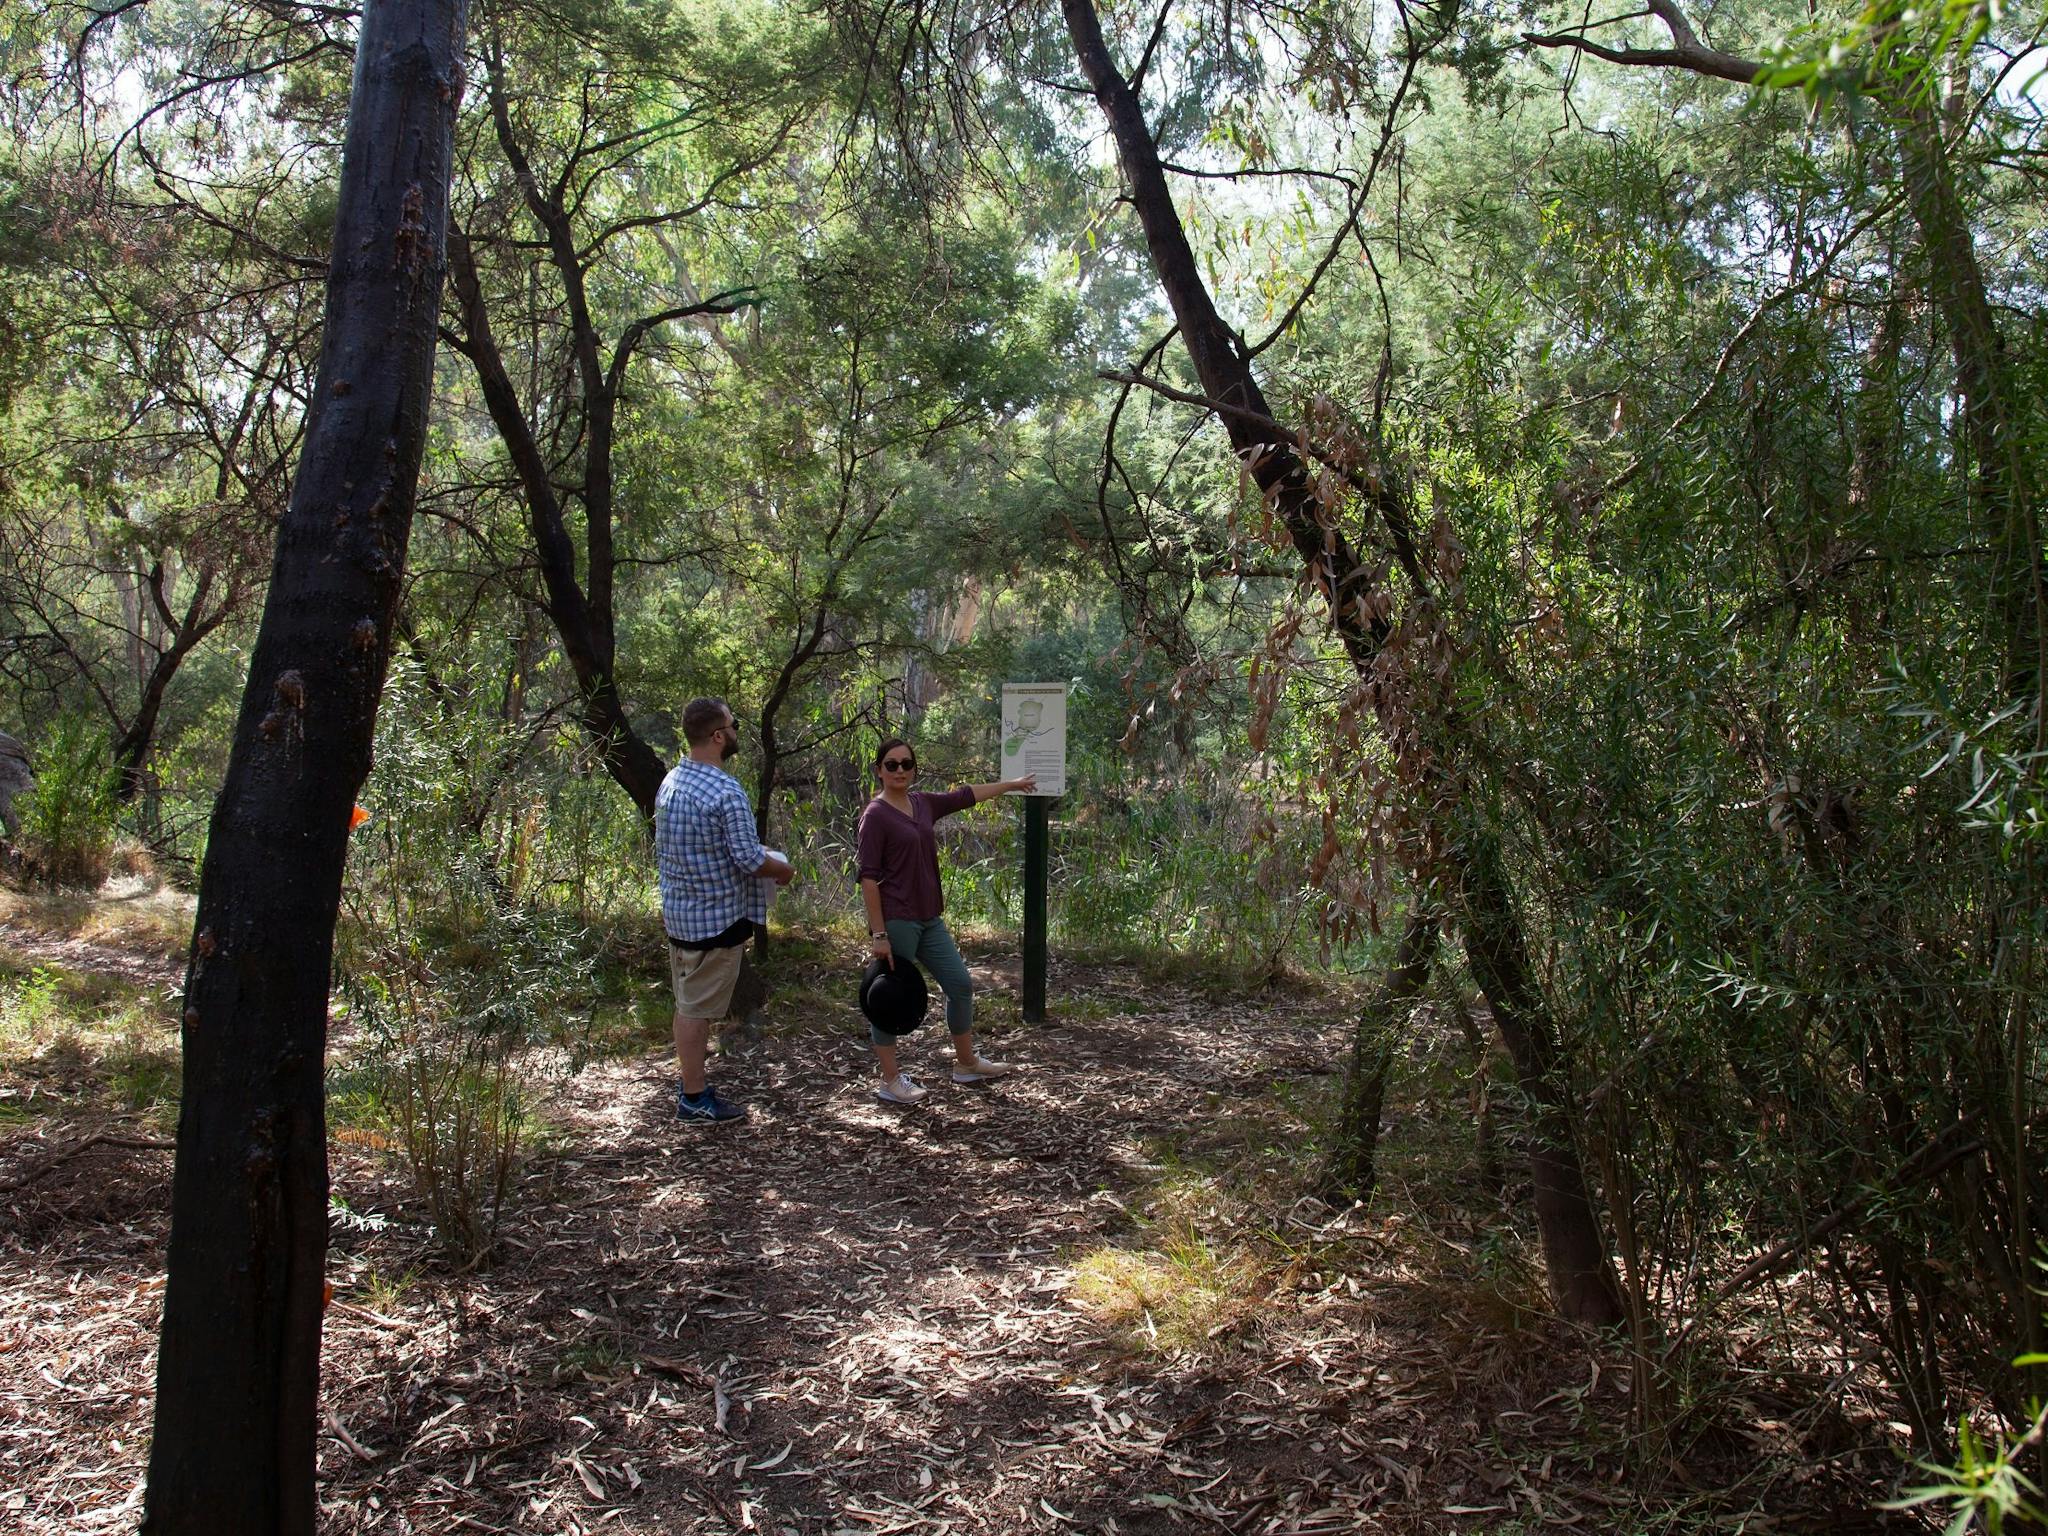 trees, leaves on ground, grasses, path, two people, one person pointing at sign